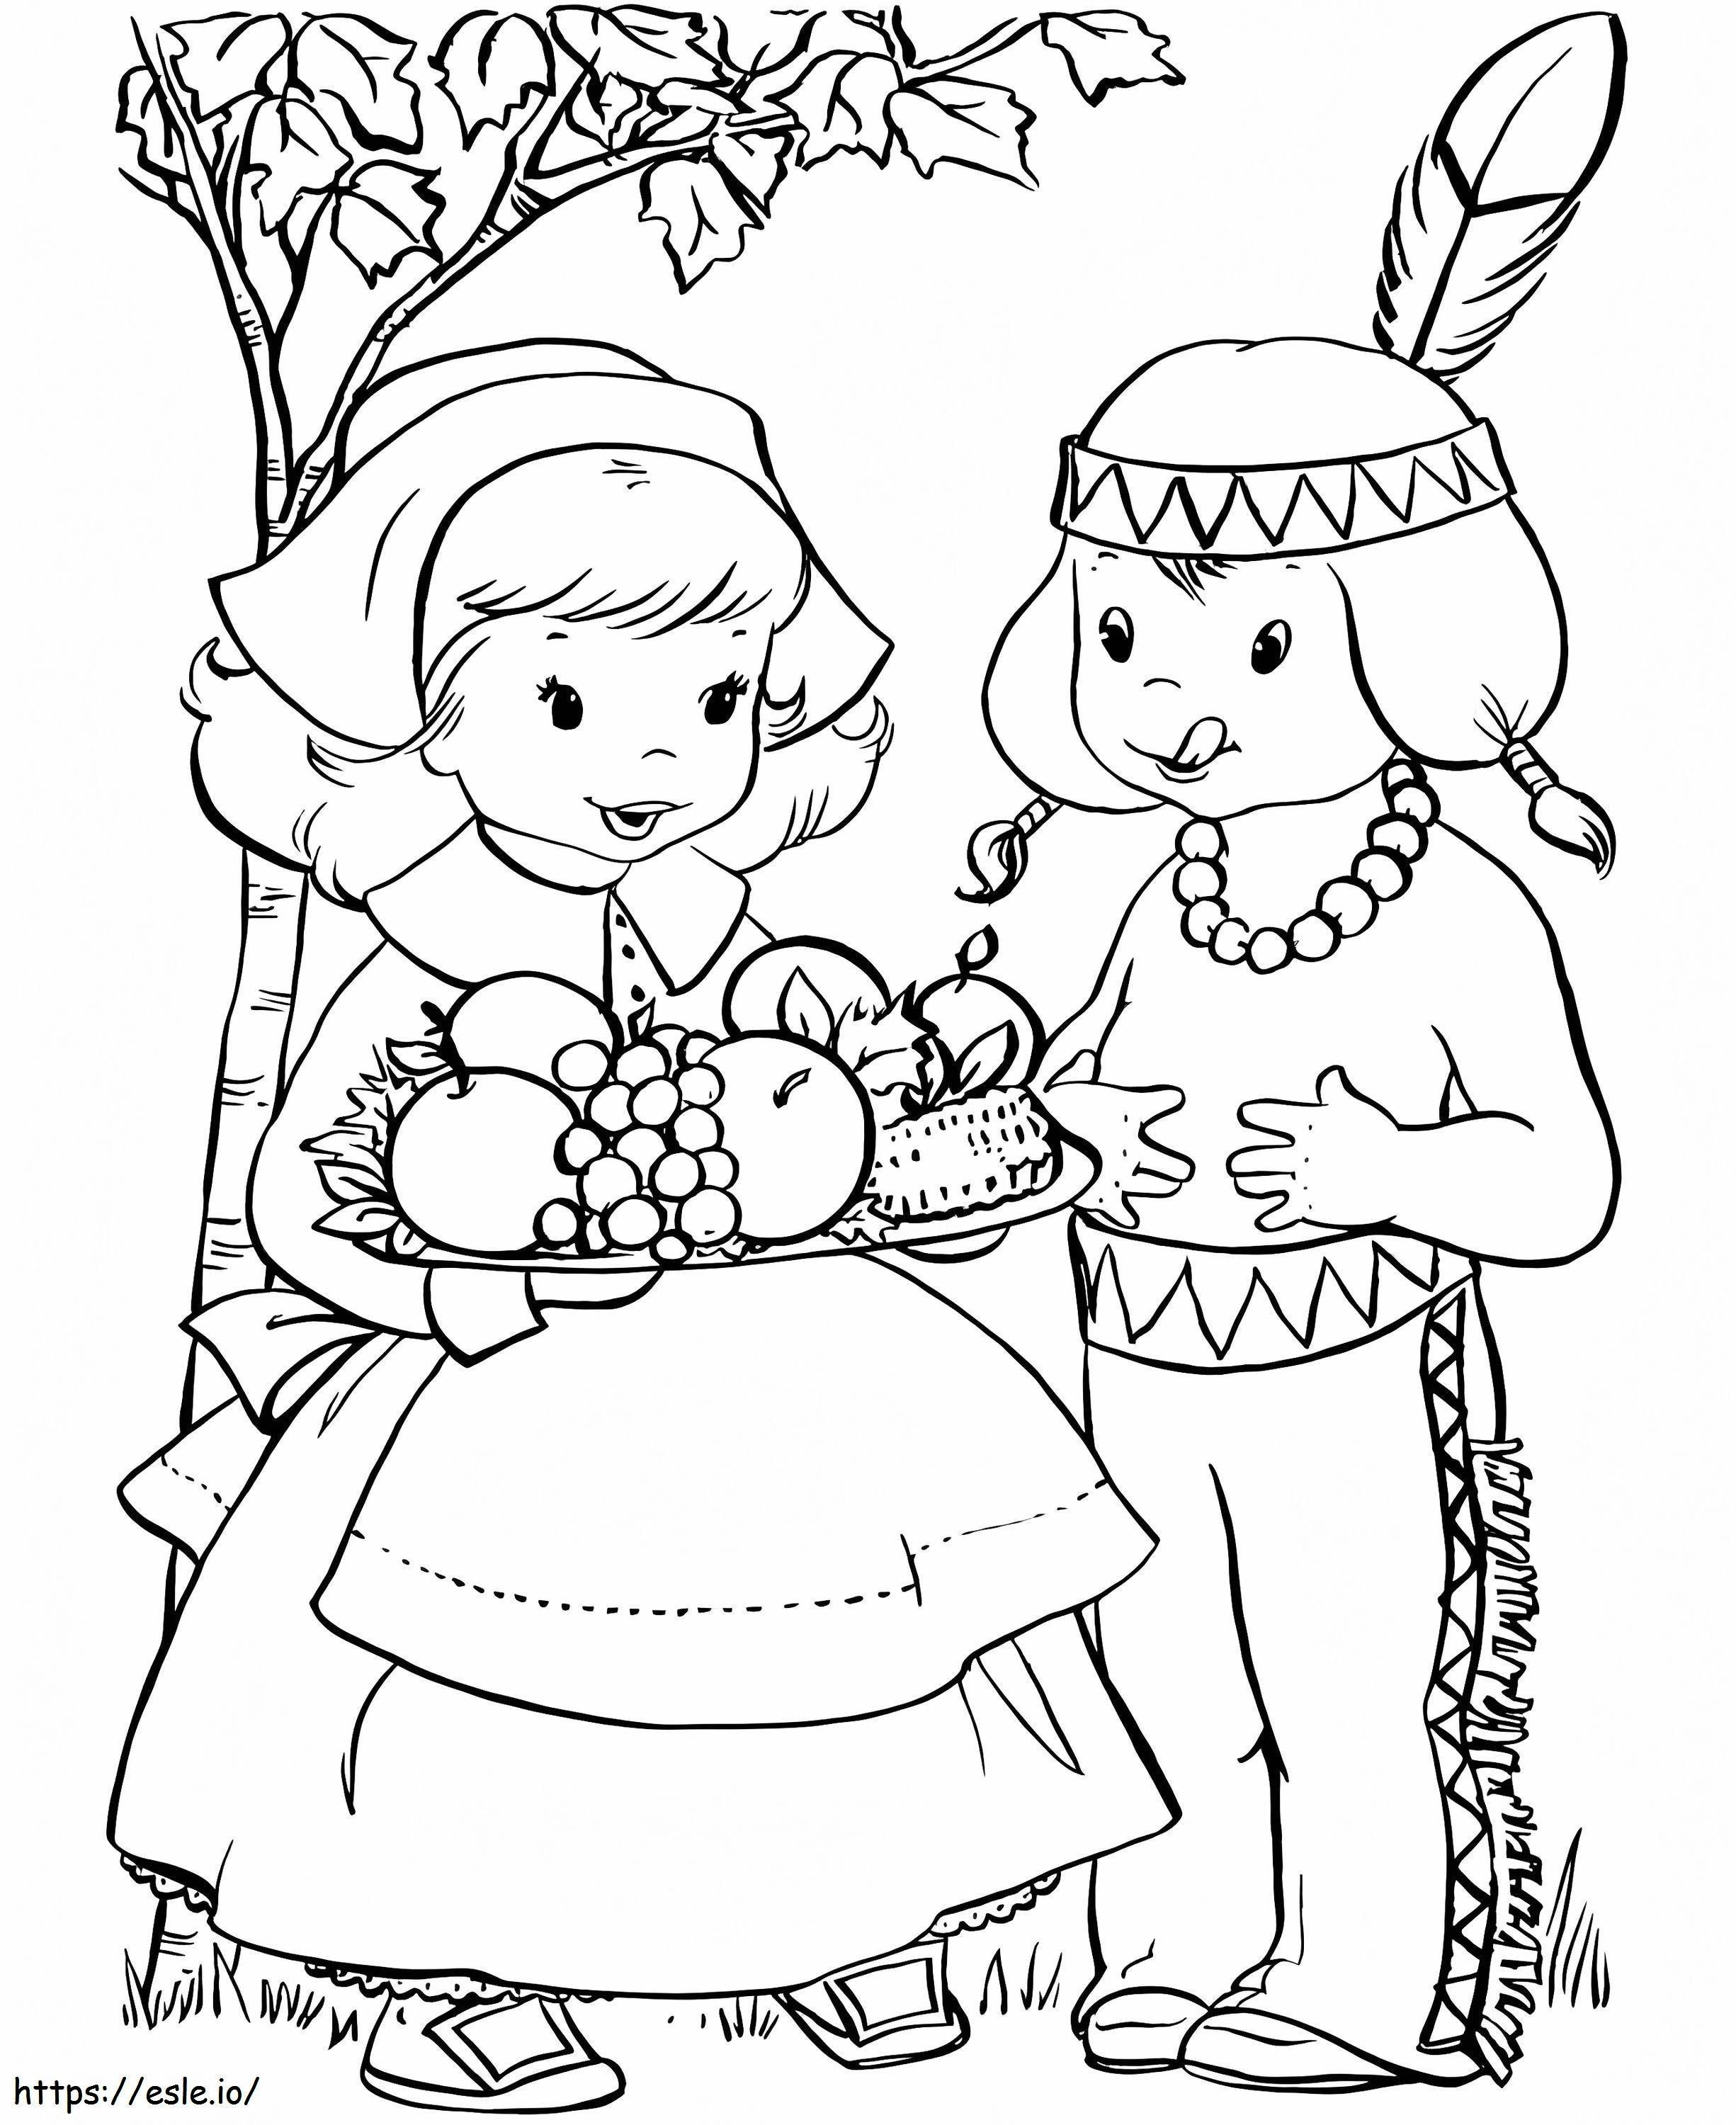 Cute Pilgrim And Indian coloring page